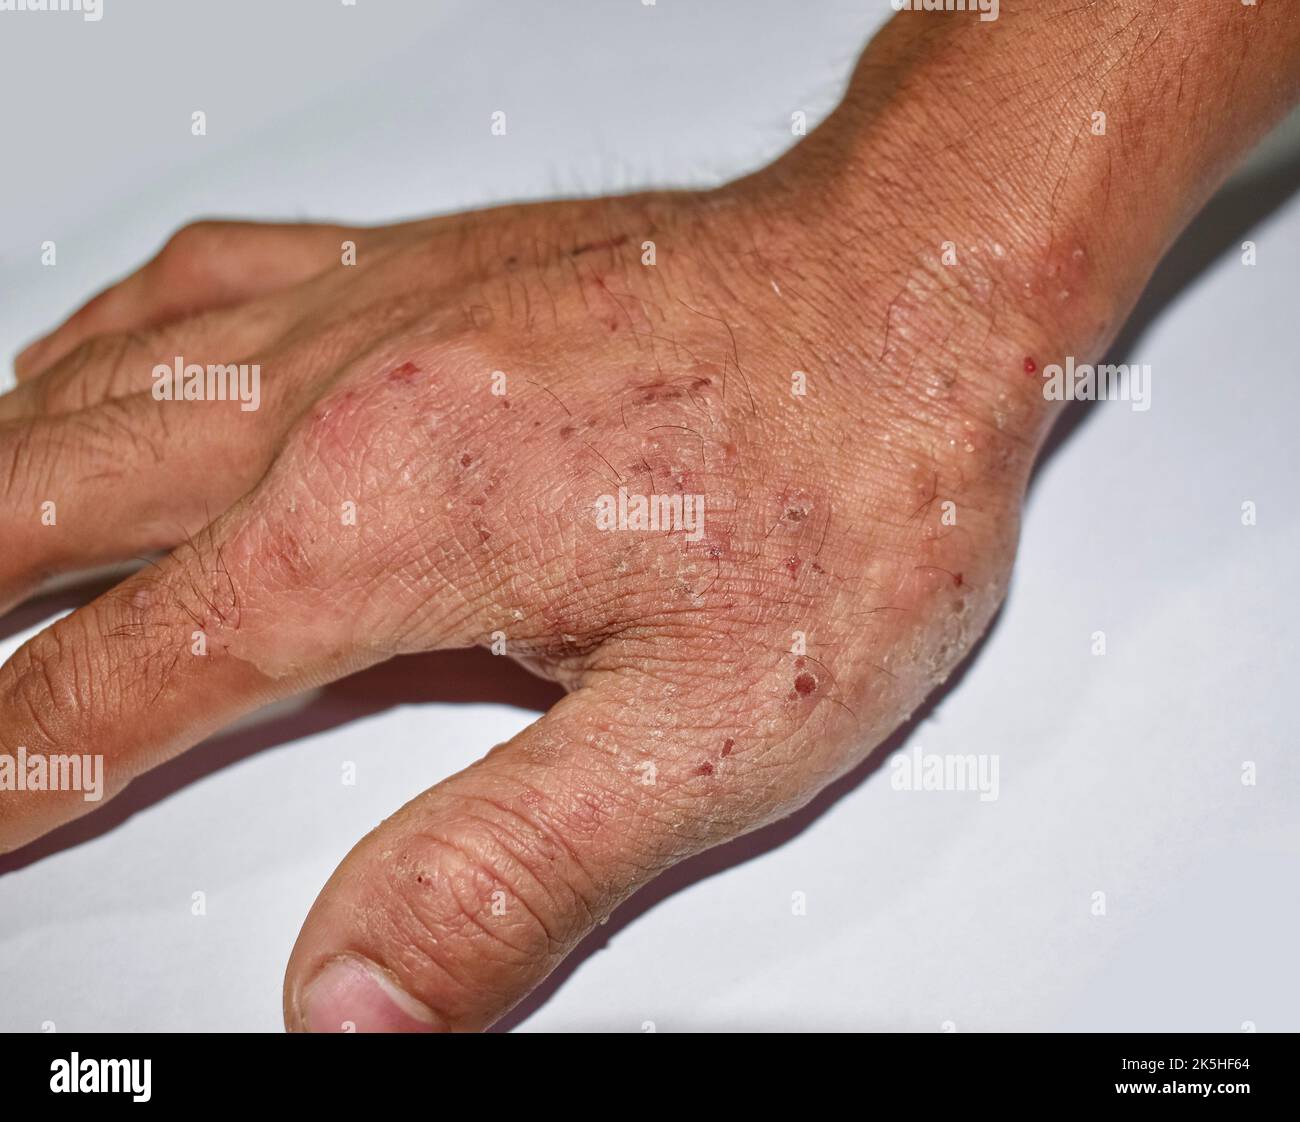 Itchy skin lesions in hand of Asian adult man. It may be caused by scabies infestation or fungal infection. Stock Photo